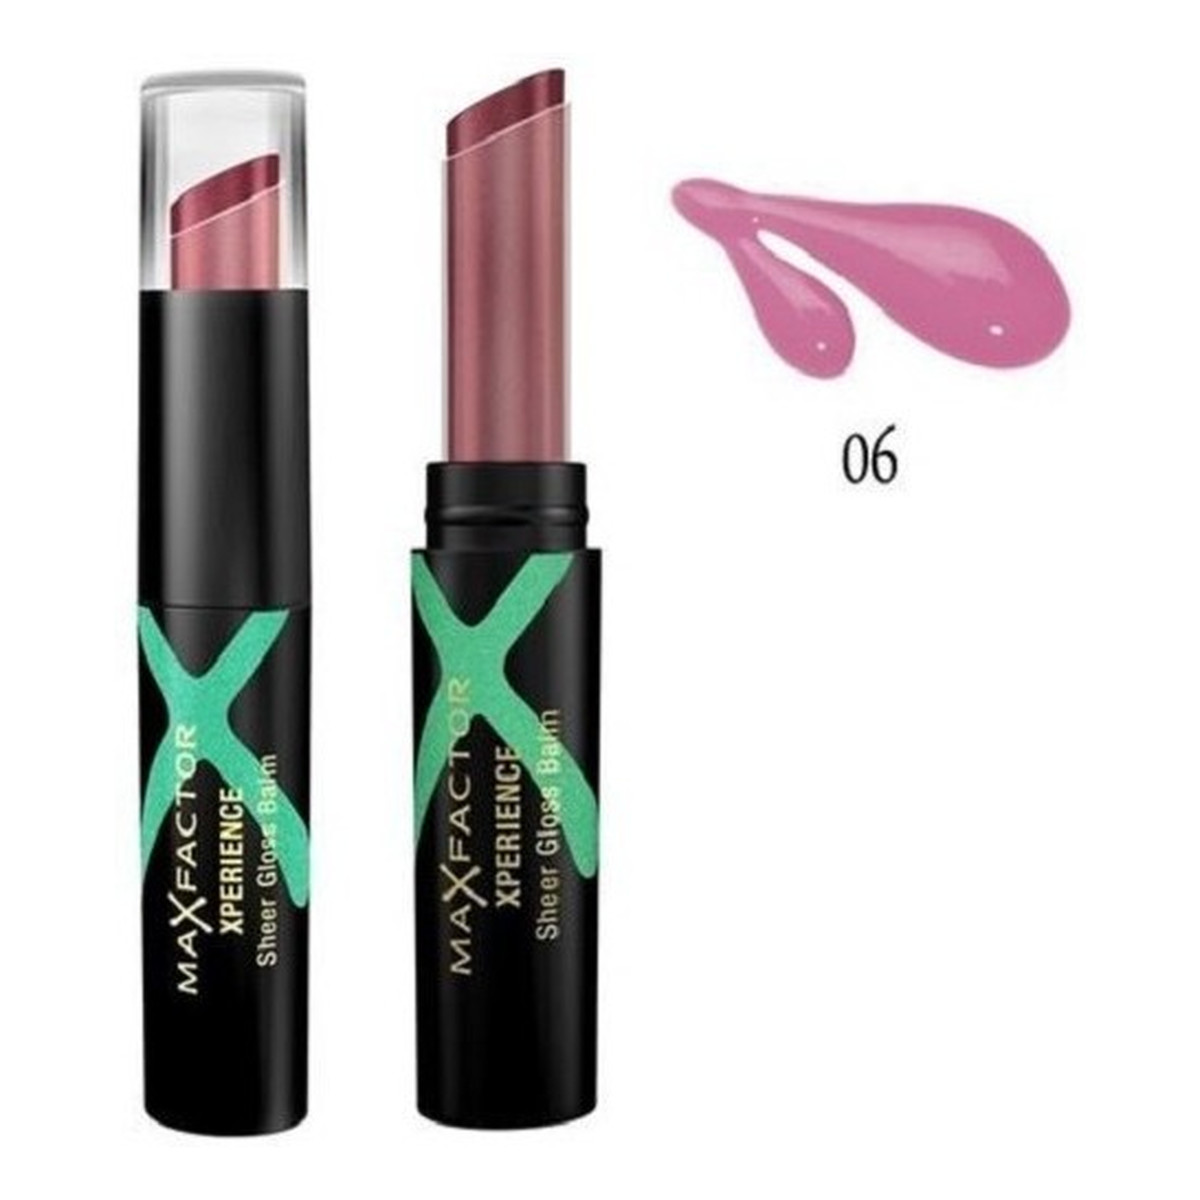 Max Factor Xperience Sheer Gloss balsam do ust